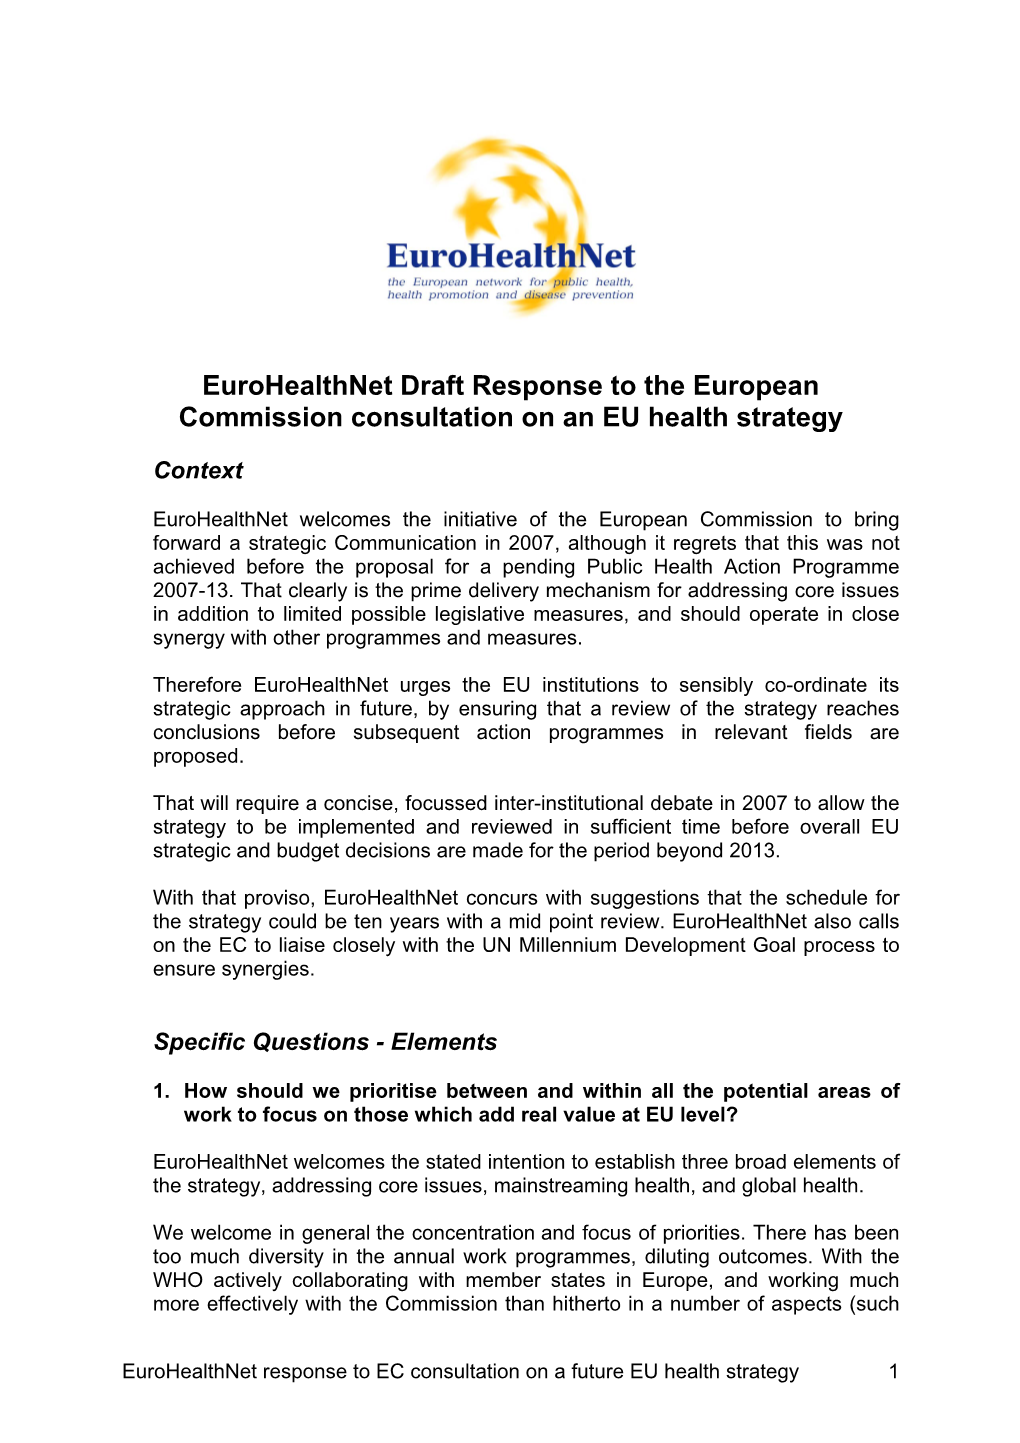 Eurohealthnet Draft Response to the European Commission Consultation on an EU Health Strategy